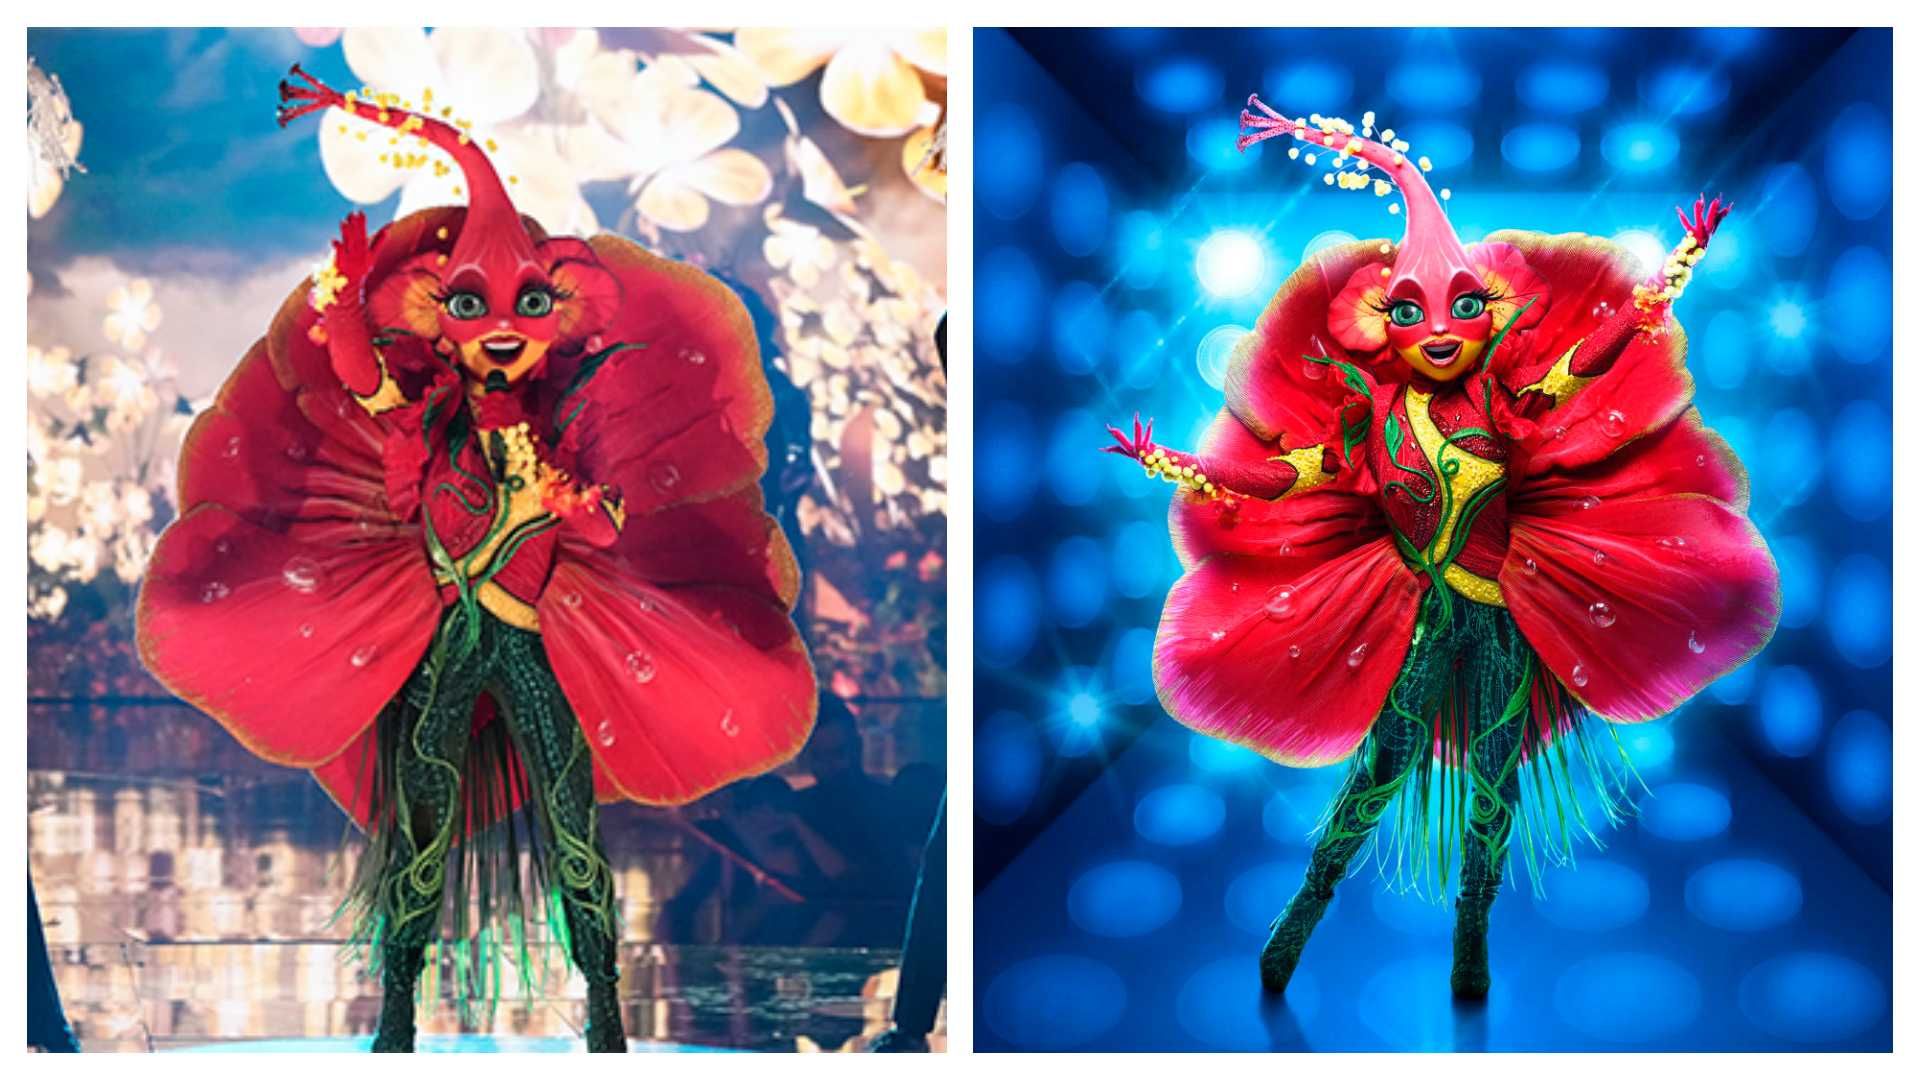 The Masked singer's hibiscus bloomed then dropped, revealing reality TV